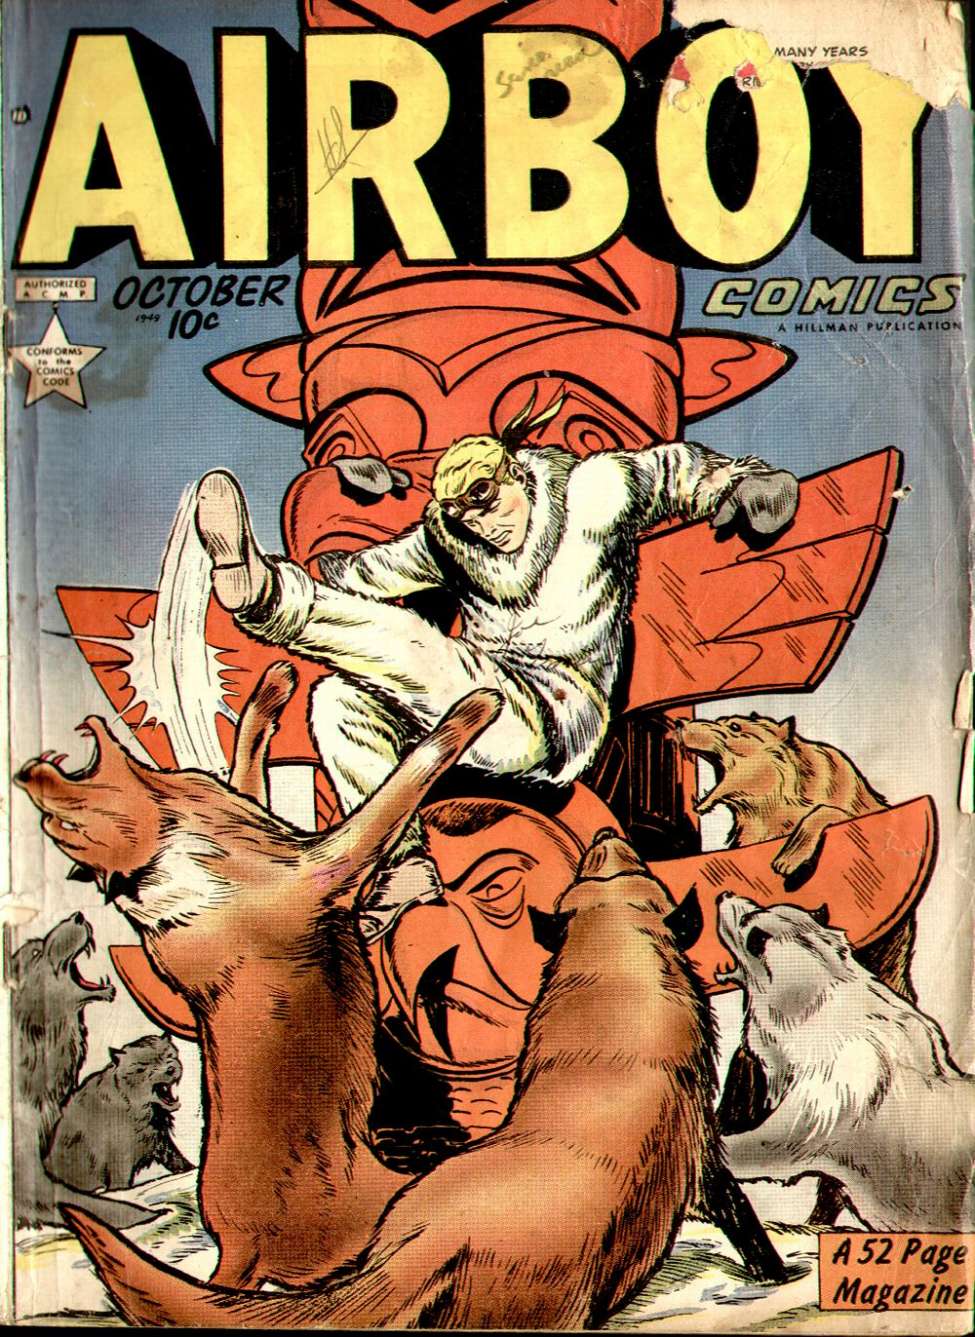 Book Cover For Airboy Comics v6 9